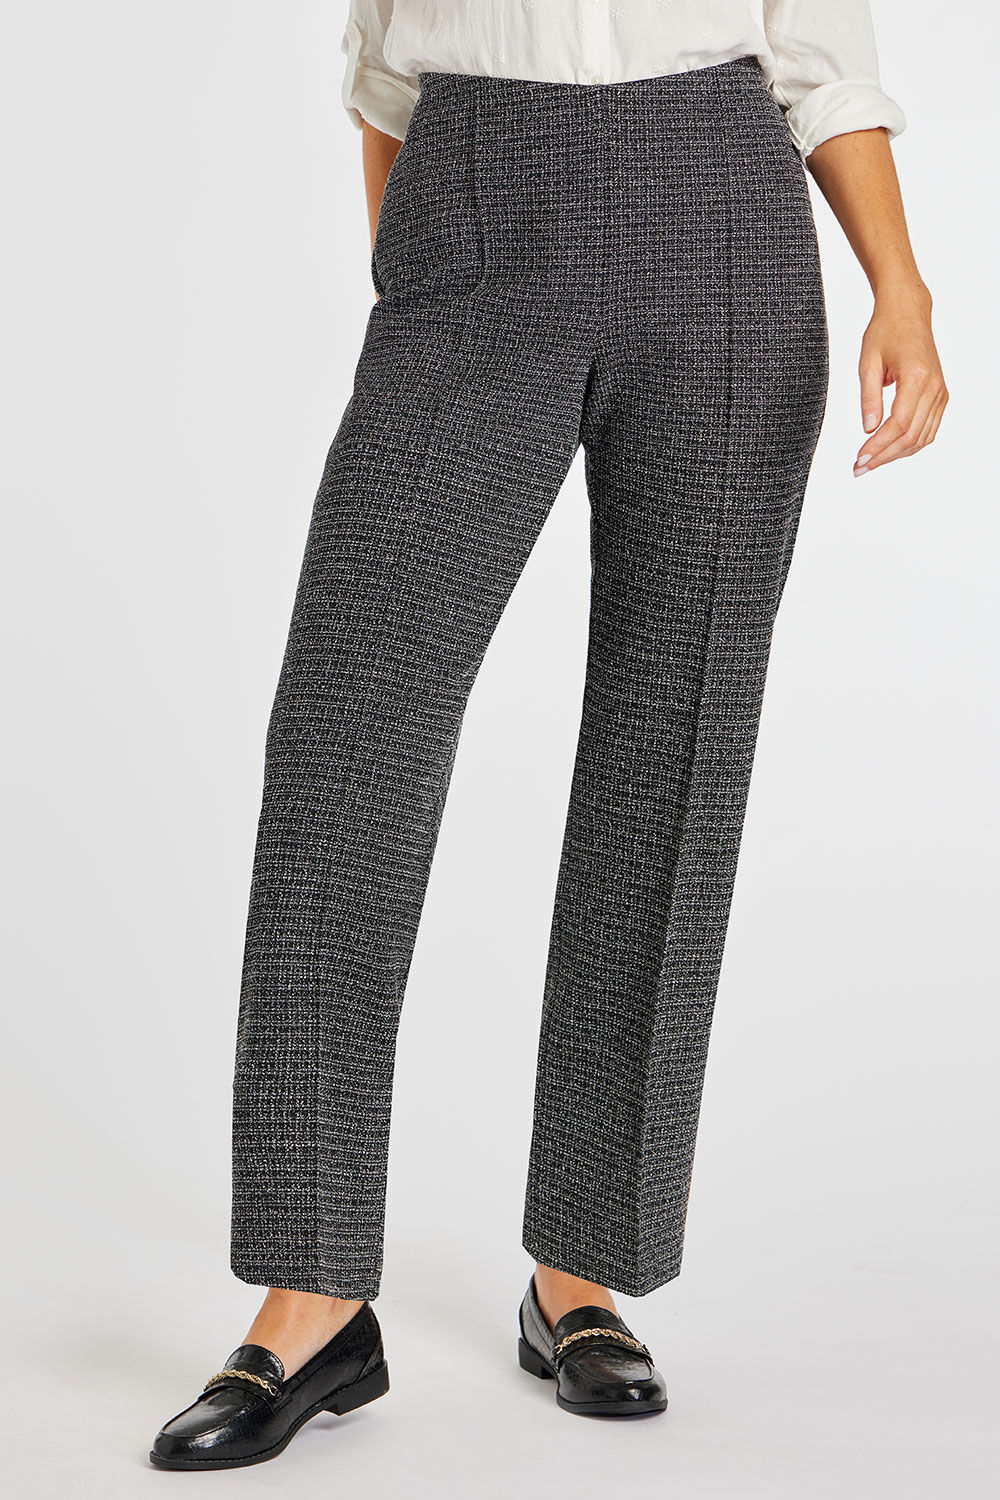 Bonmarche Charcoal Checked Jacquard Pleated Front Elasticated Trousers, Size: 10